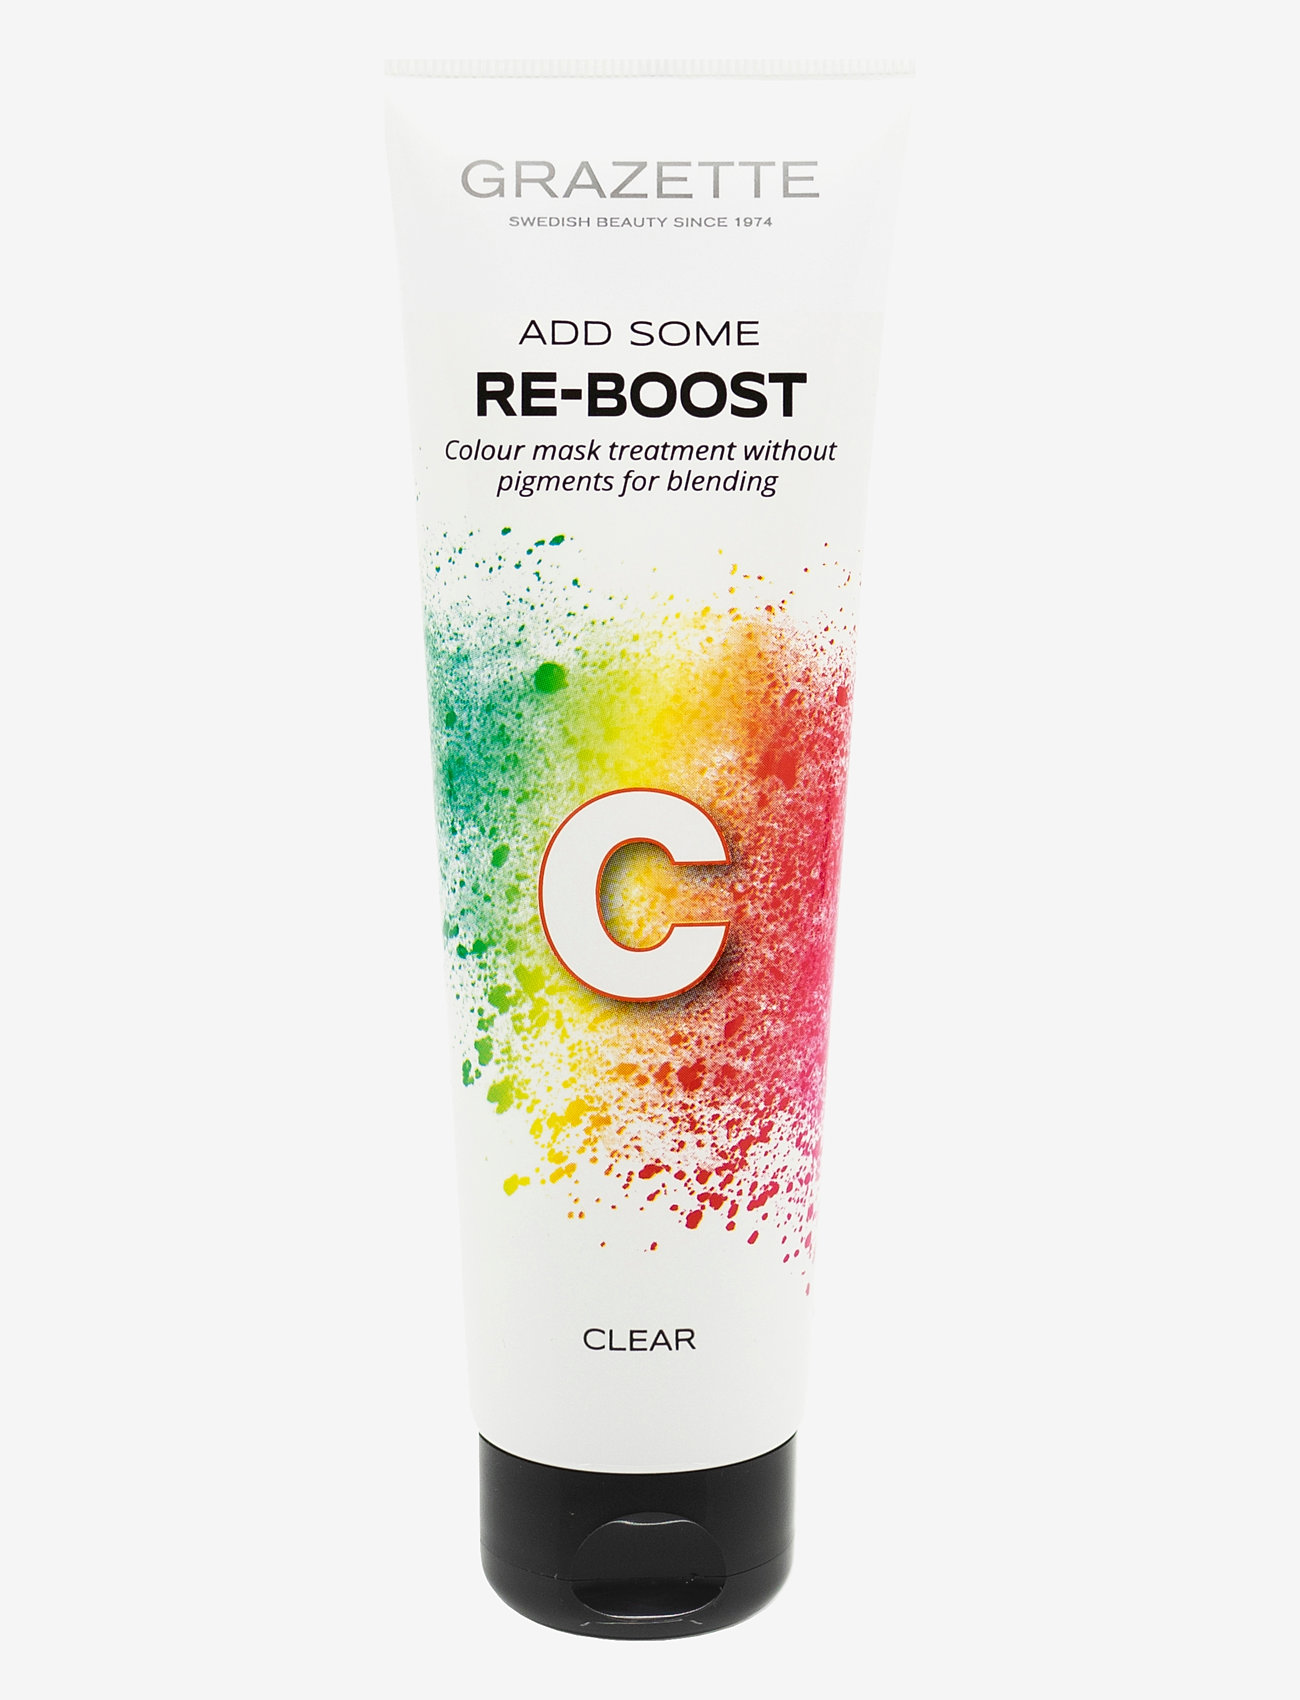 Re-Boost - ADD SOME RE-BOOST CLEAR - laveste priser - clear - 0